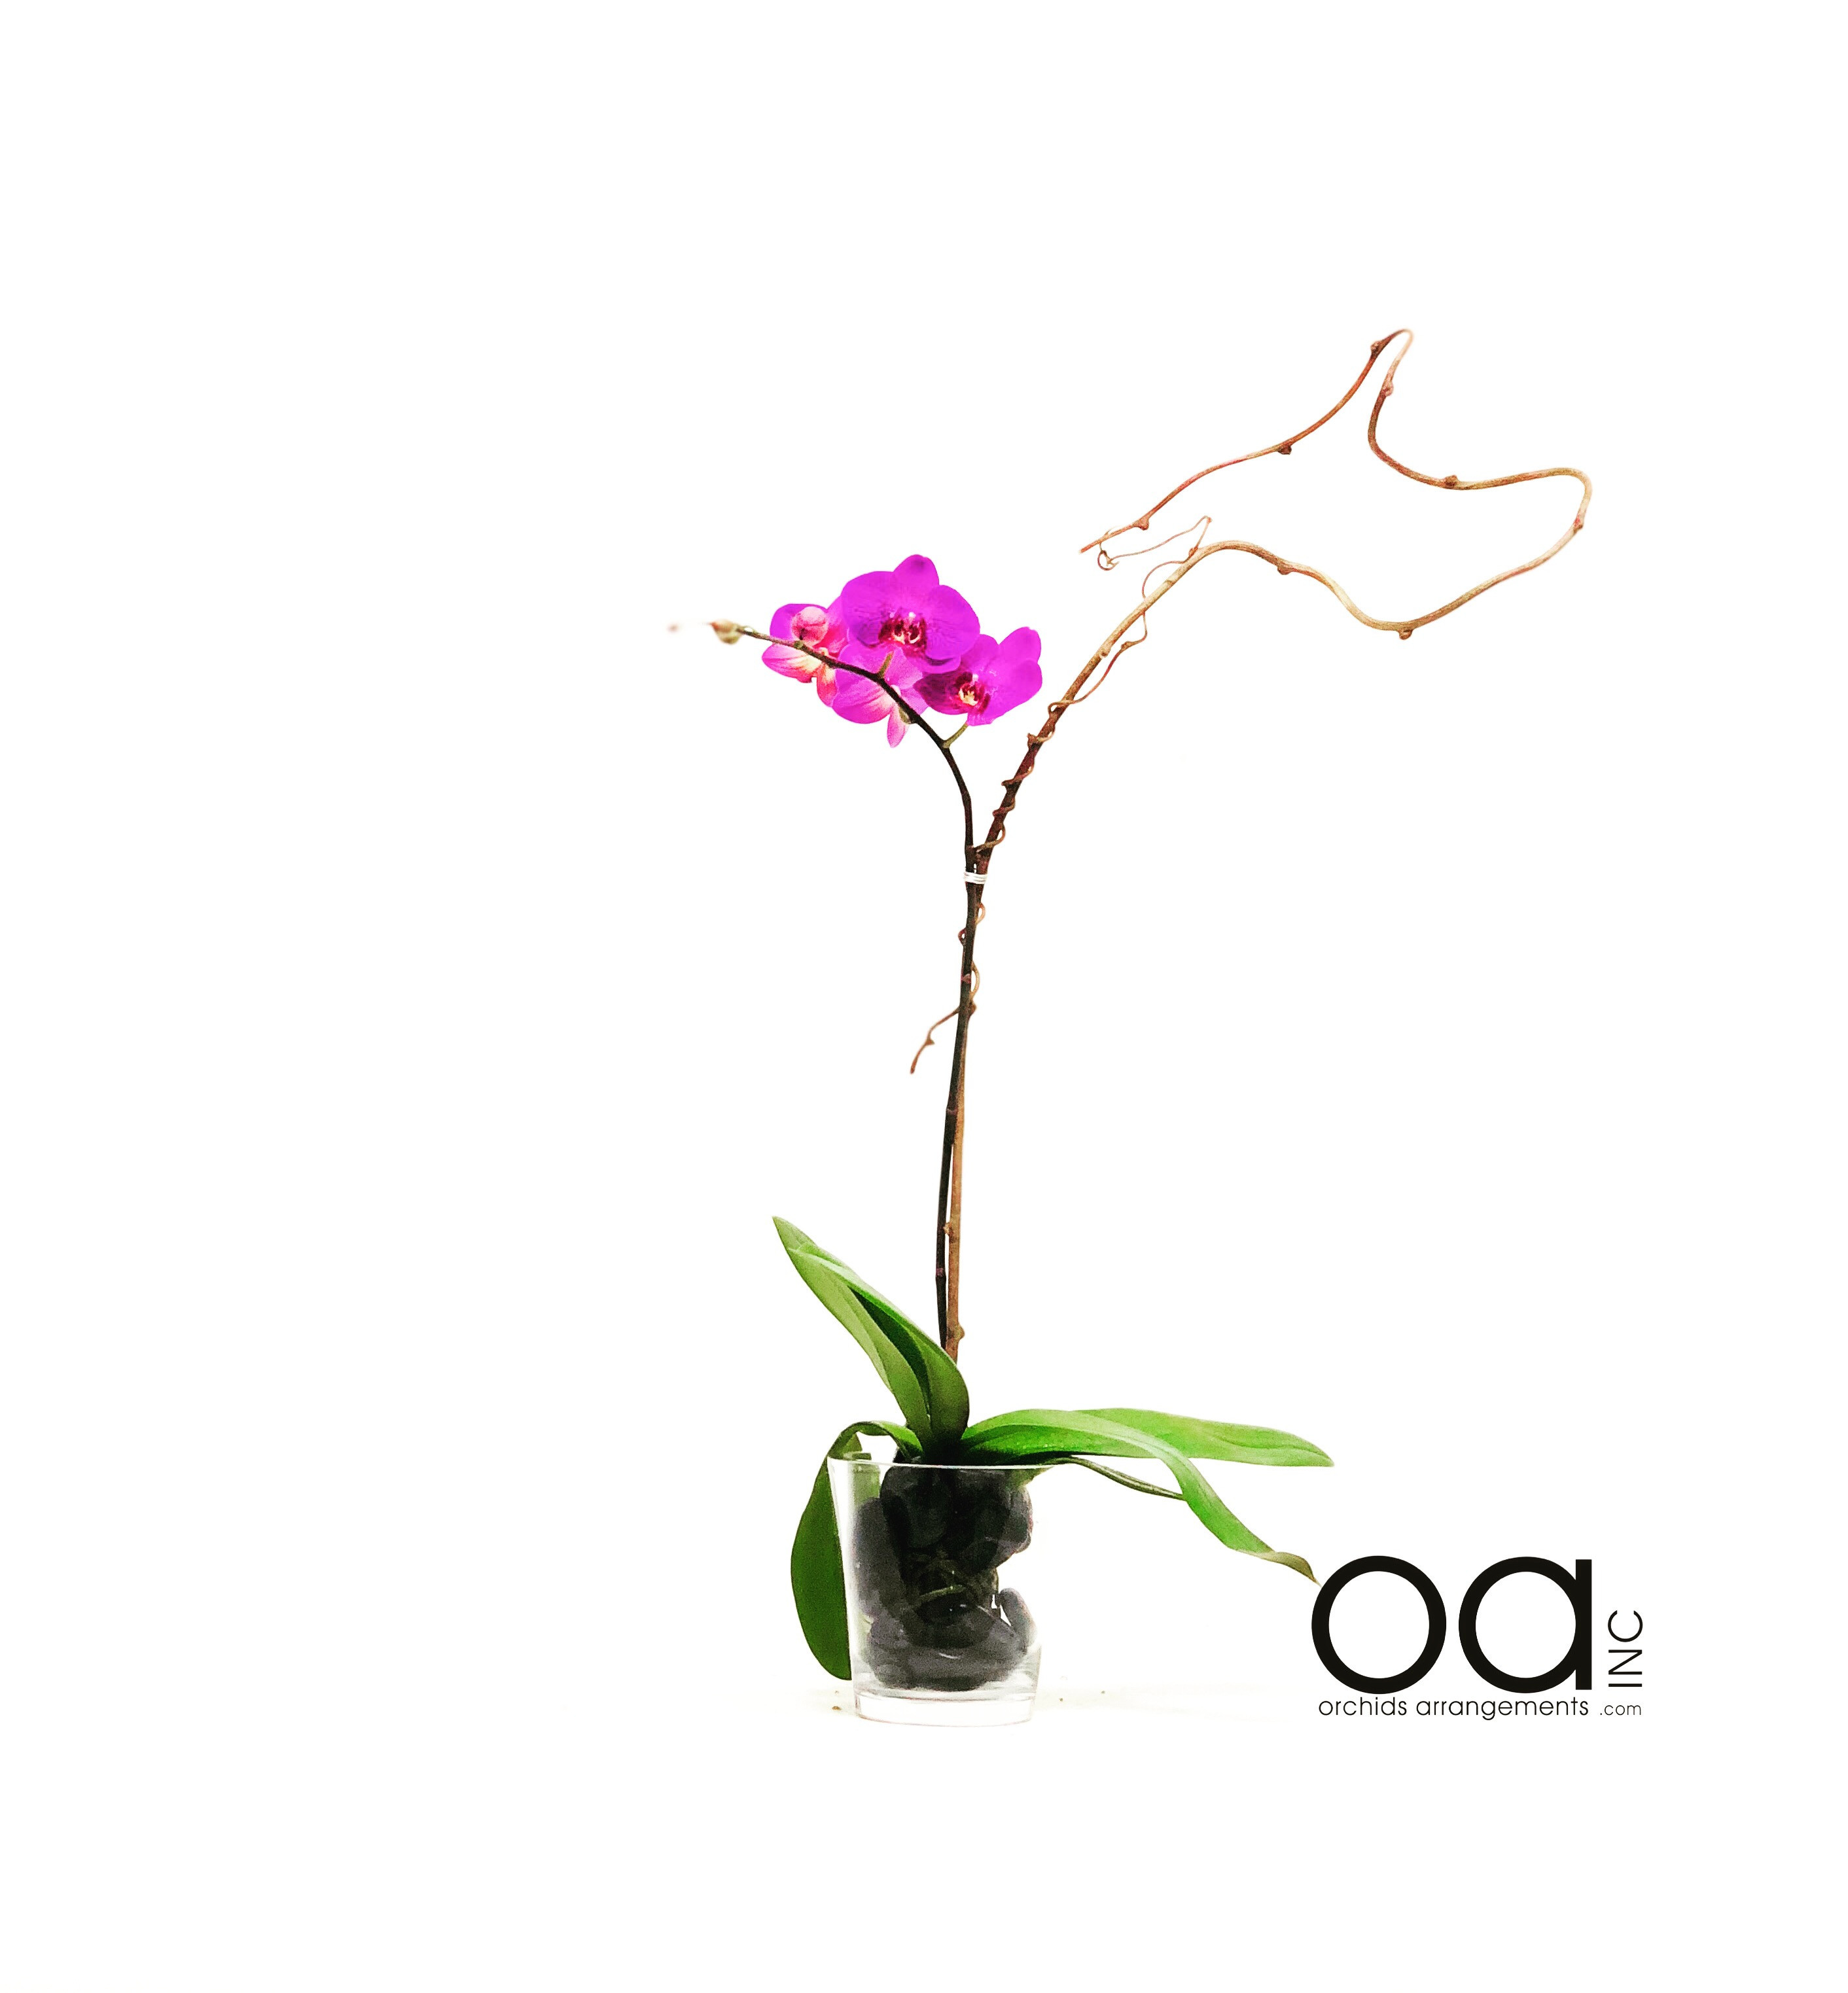 30 Unique Long Stem Flowers In Vase 2024 free download long stem flowers in vase of send 1 orchids arrangements fat conical vase in miami fl orchids regarding send 1 orchids arrangements fat conical vase